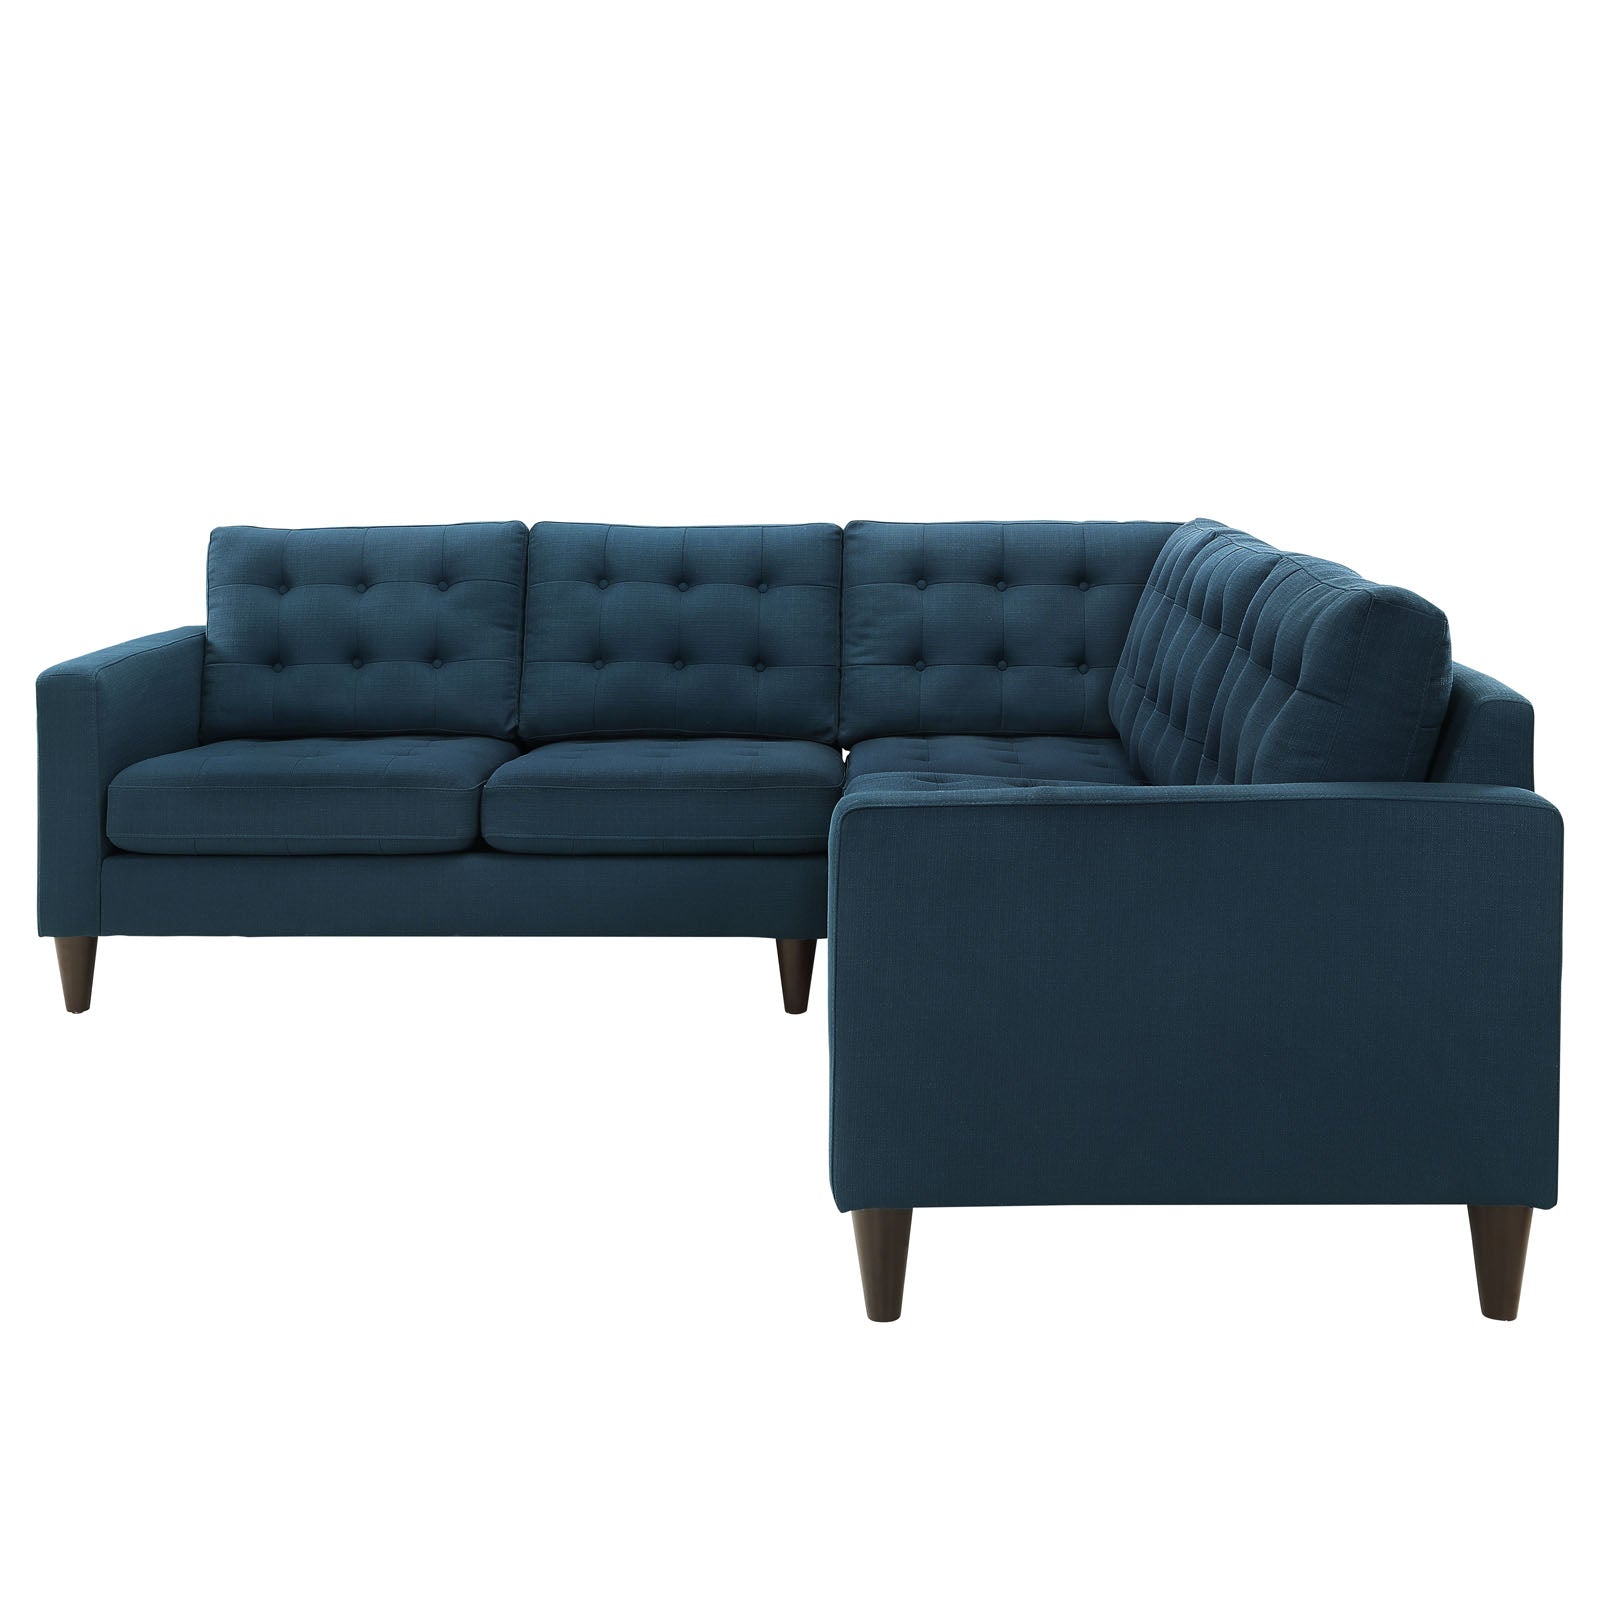 Modway Sectional Sofas - Empress 3 Piece Upholstered Fabric Sectional Sofa Set Azure